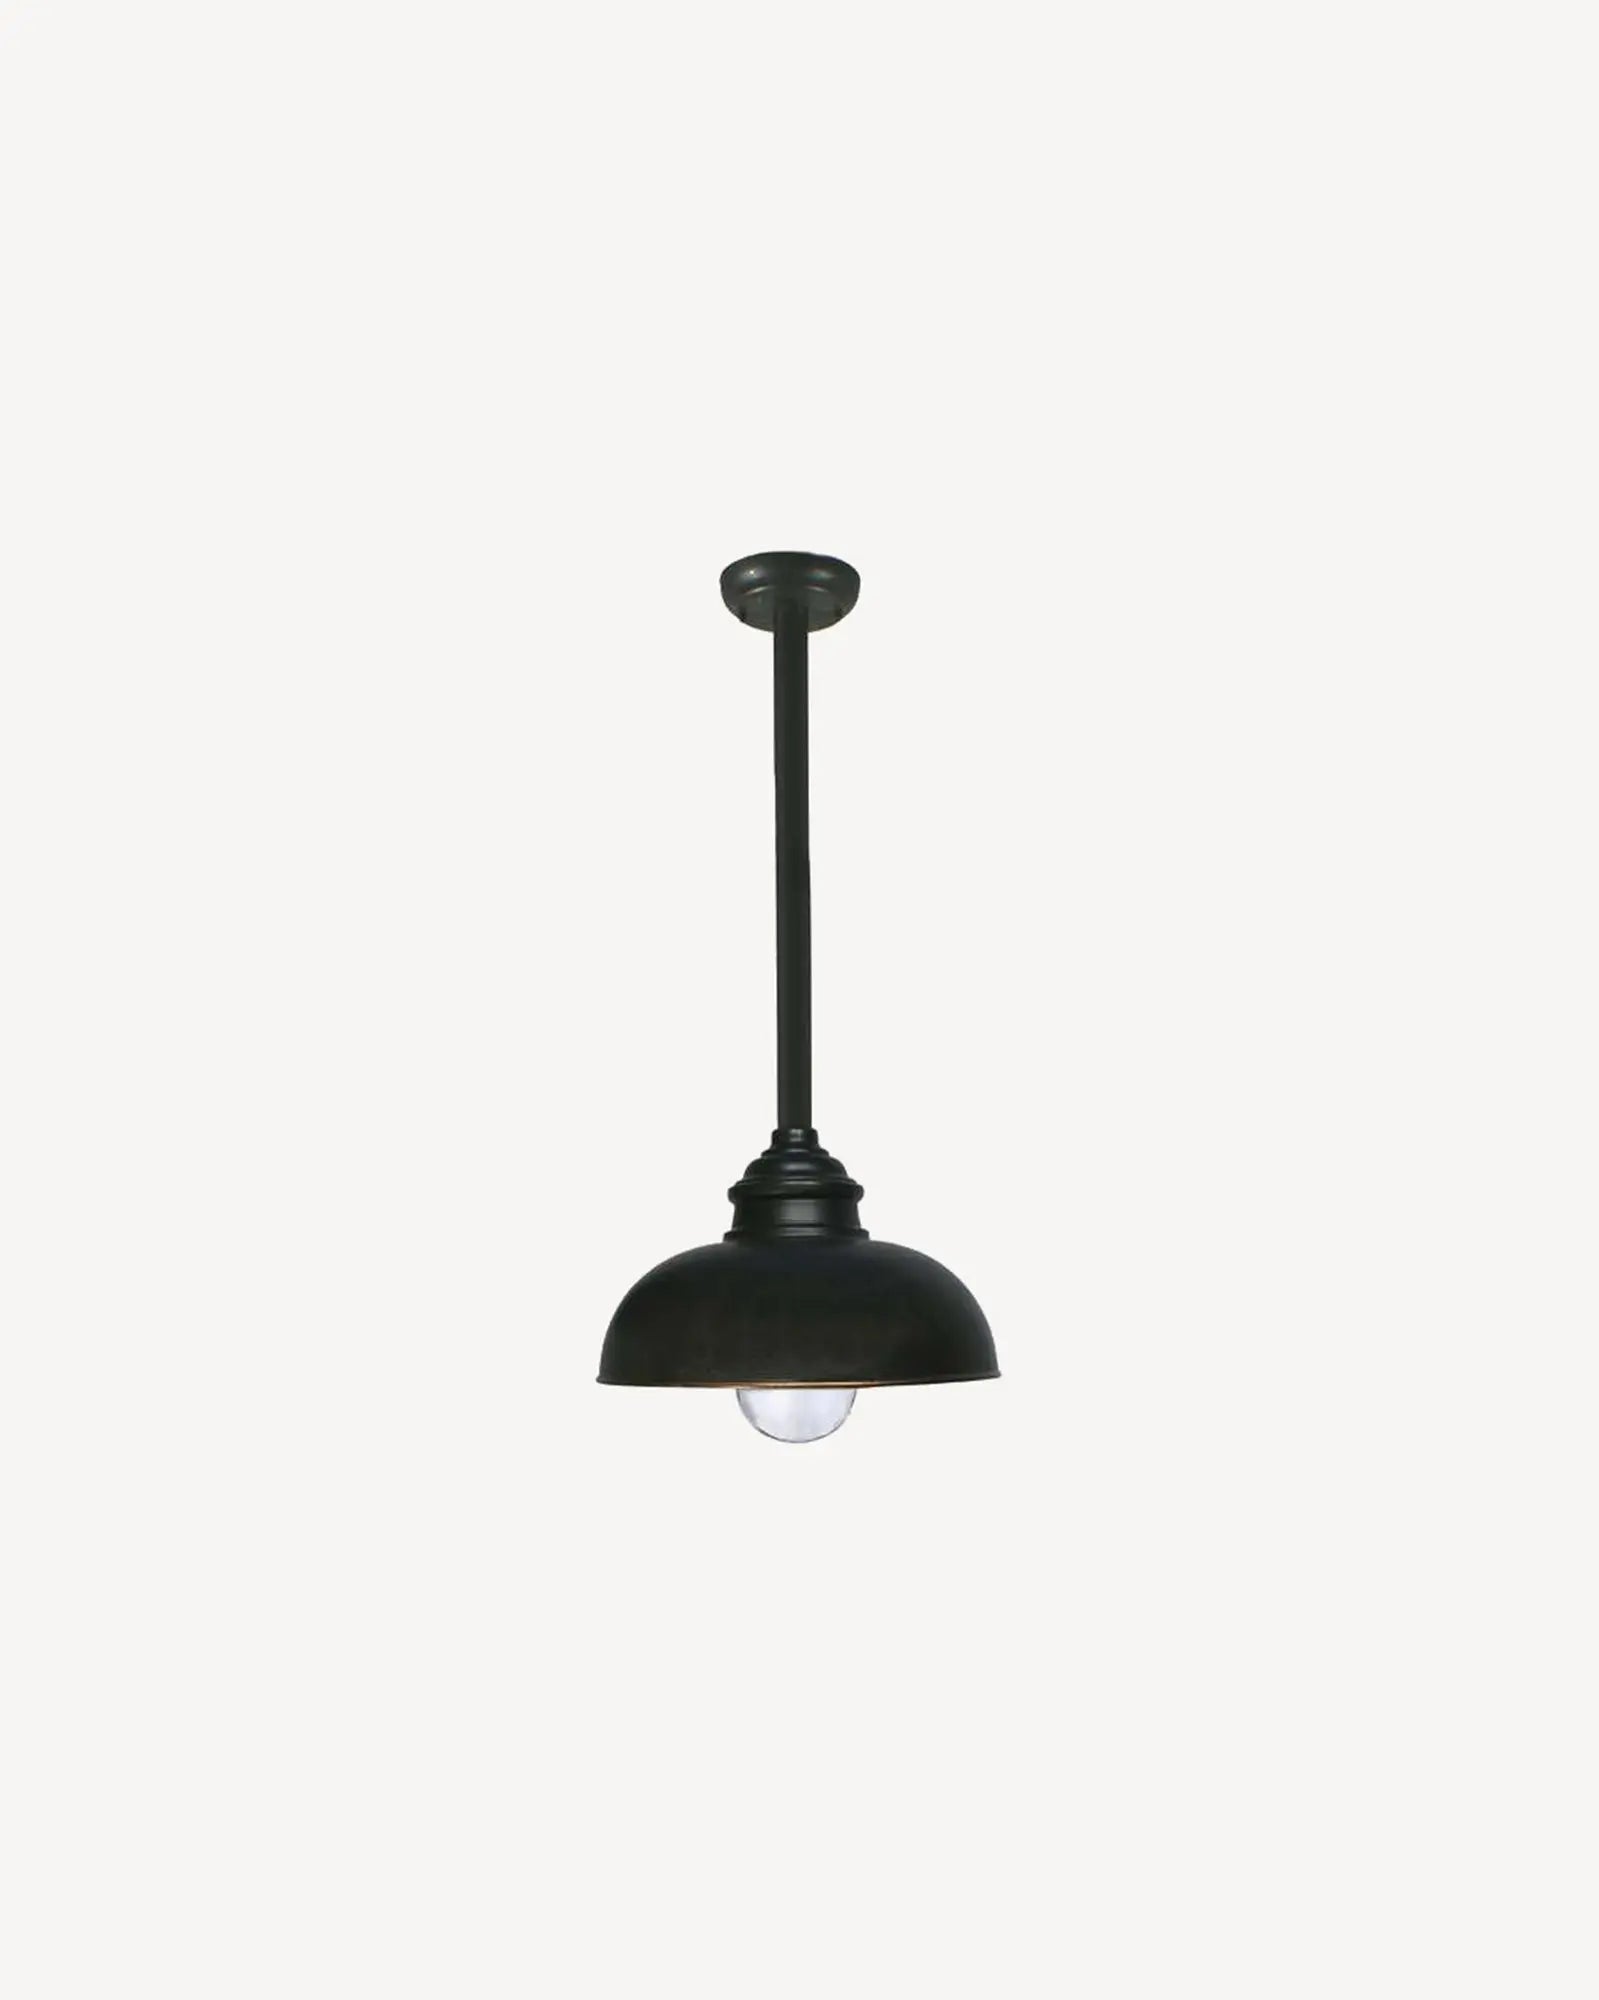 Parkway rod pendant light by Inspiration Light at Nook Collections